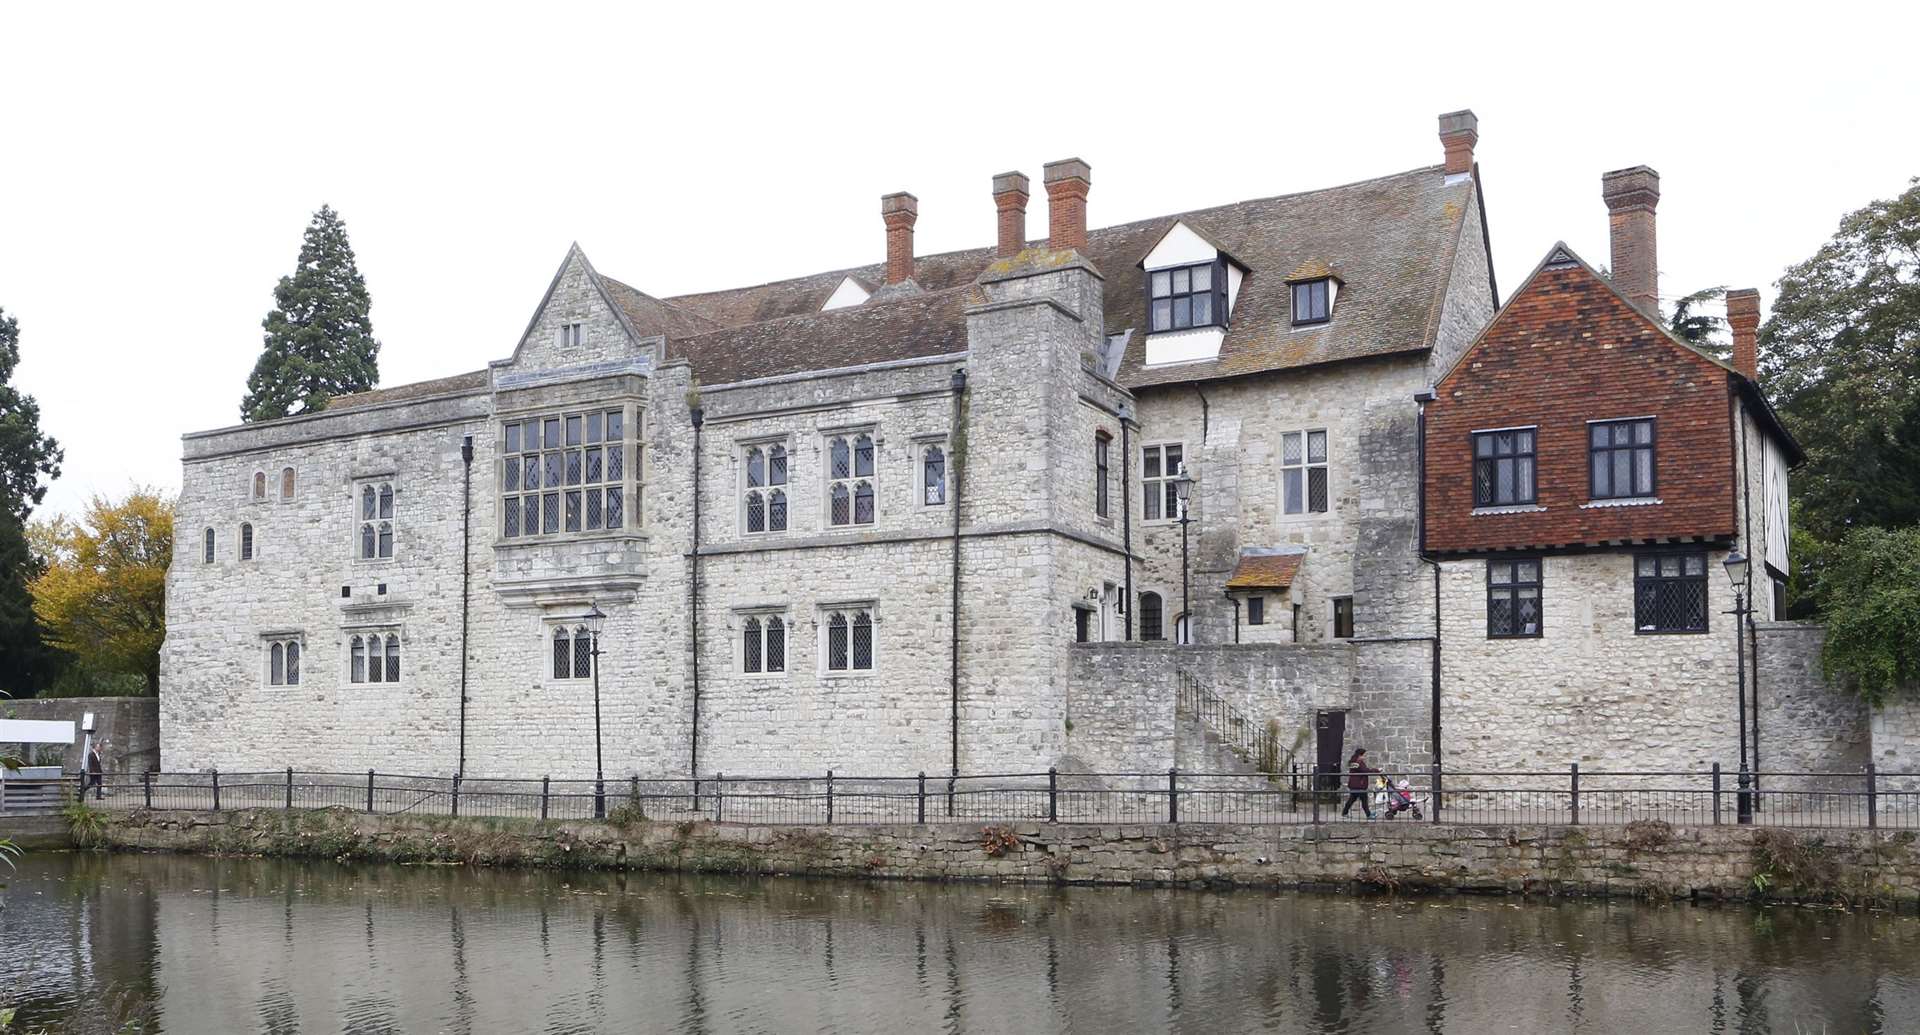 Archbishop's Palace in Maidstone.Picture: Andy Jones